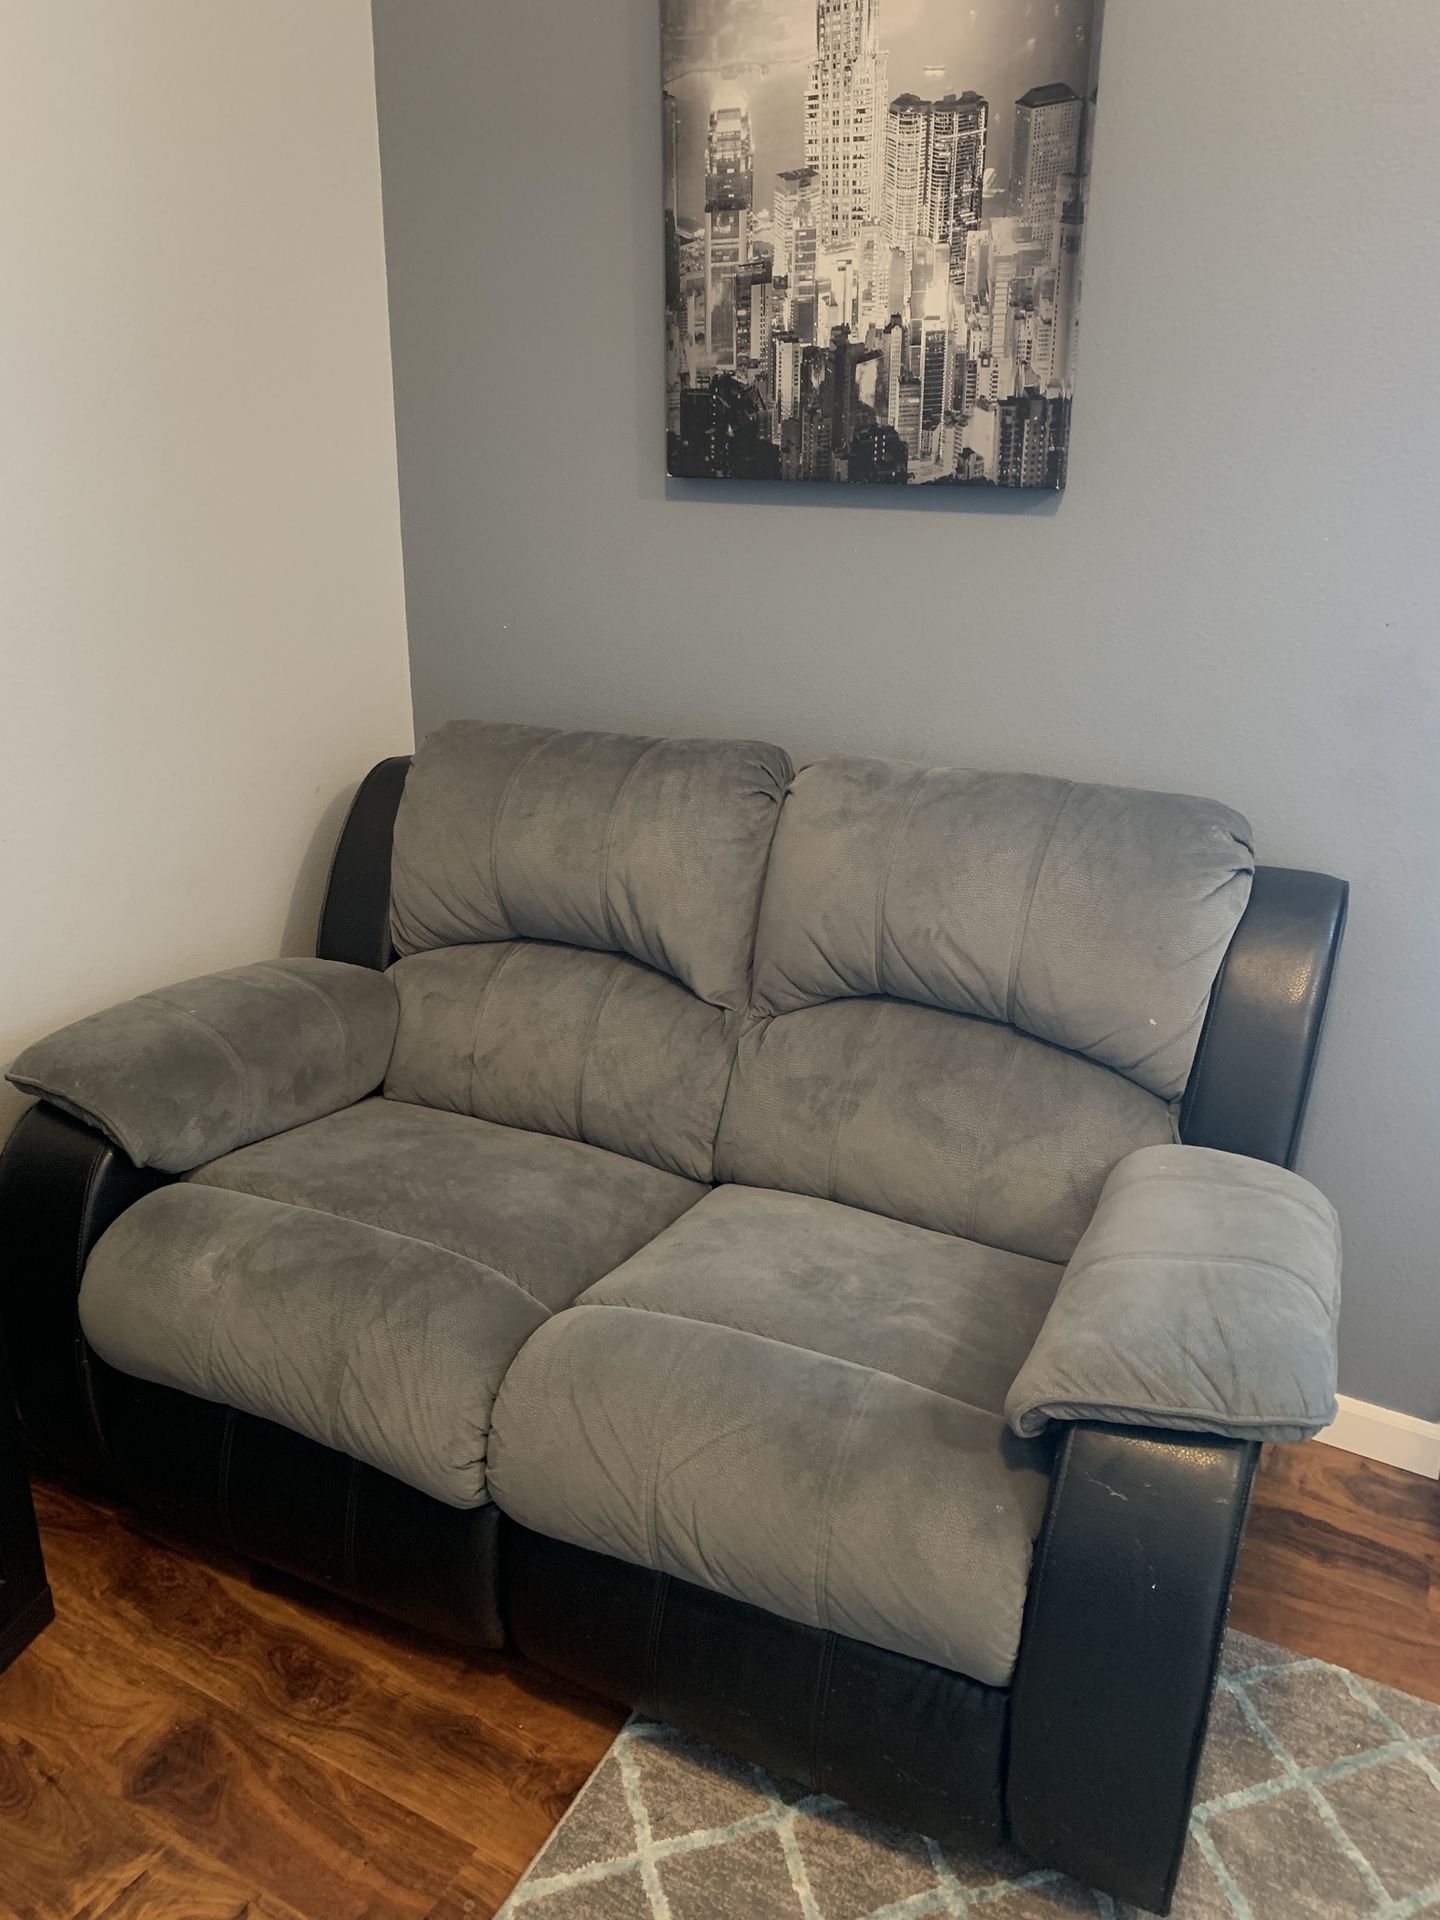 Grey & black recliner couch set